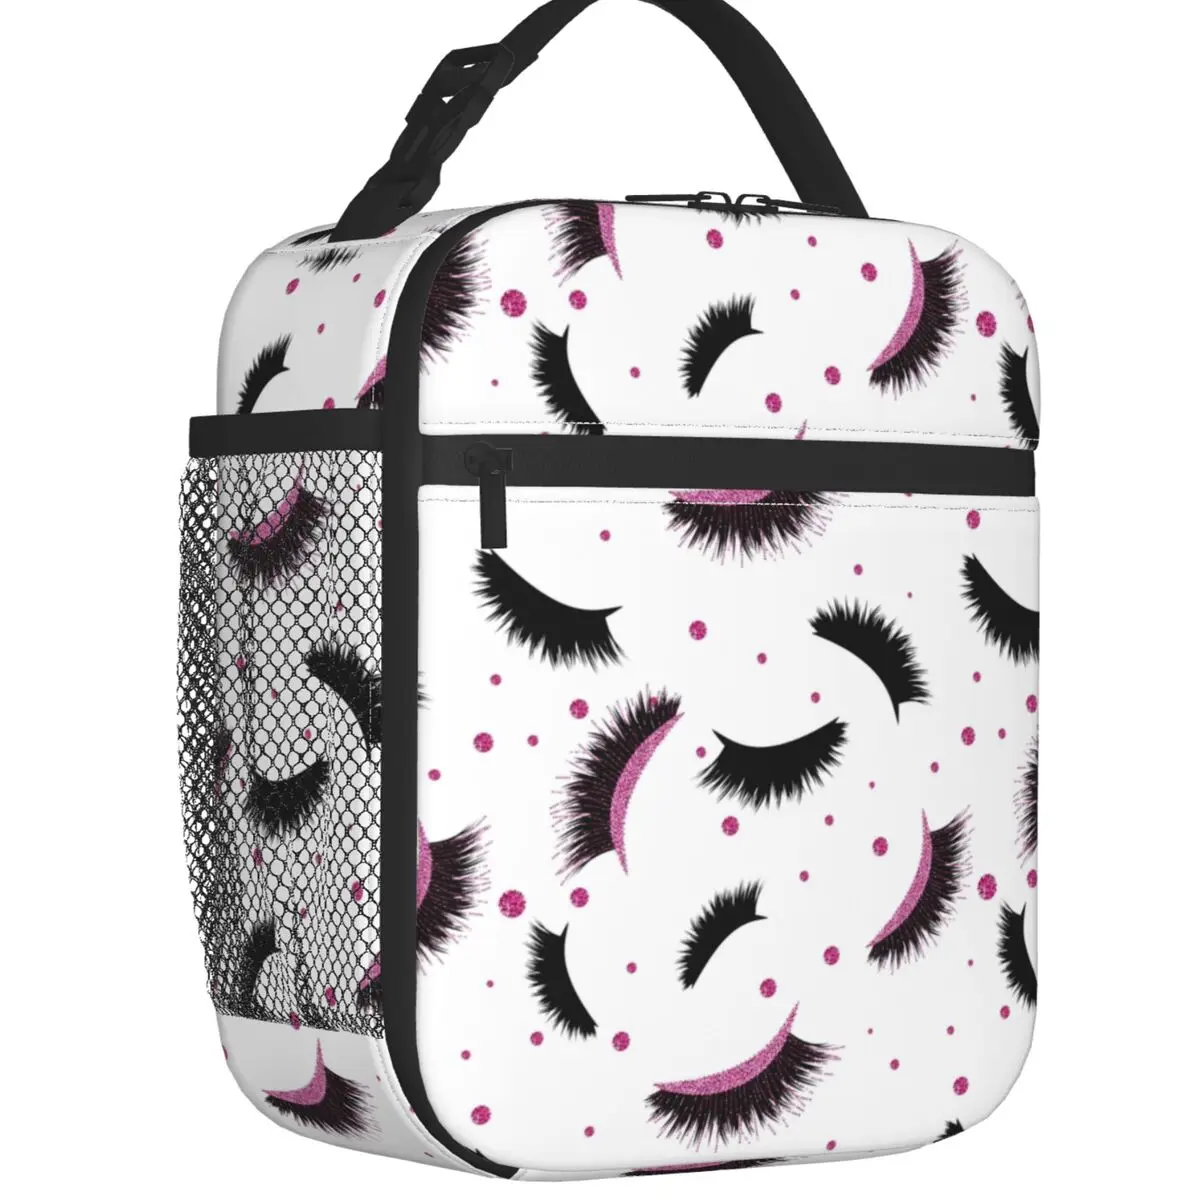 Eyelash Eye Portable Lunch Box Pink Lashes Seamless Pattern With Glitter Thermal Cooler Food Insulated Lunch Bag School Children